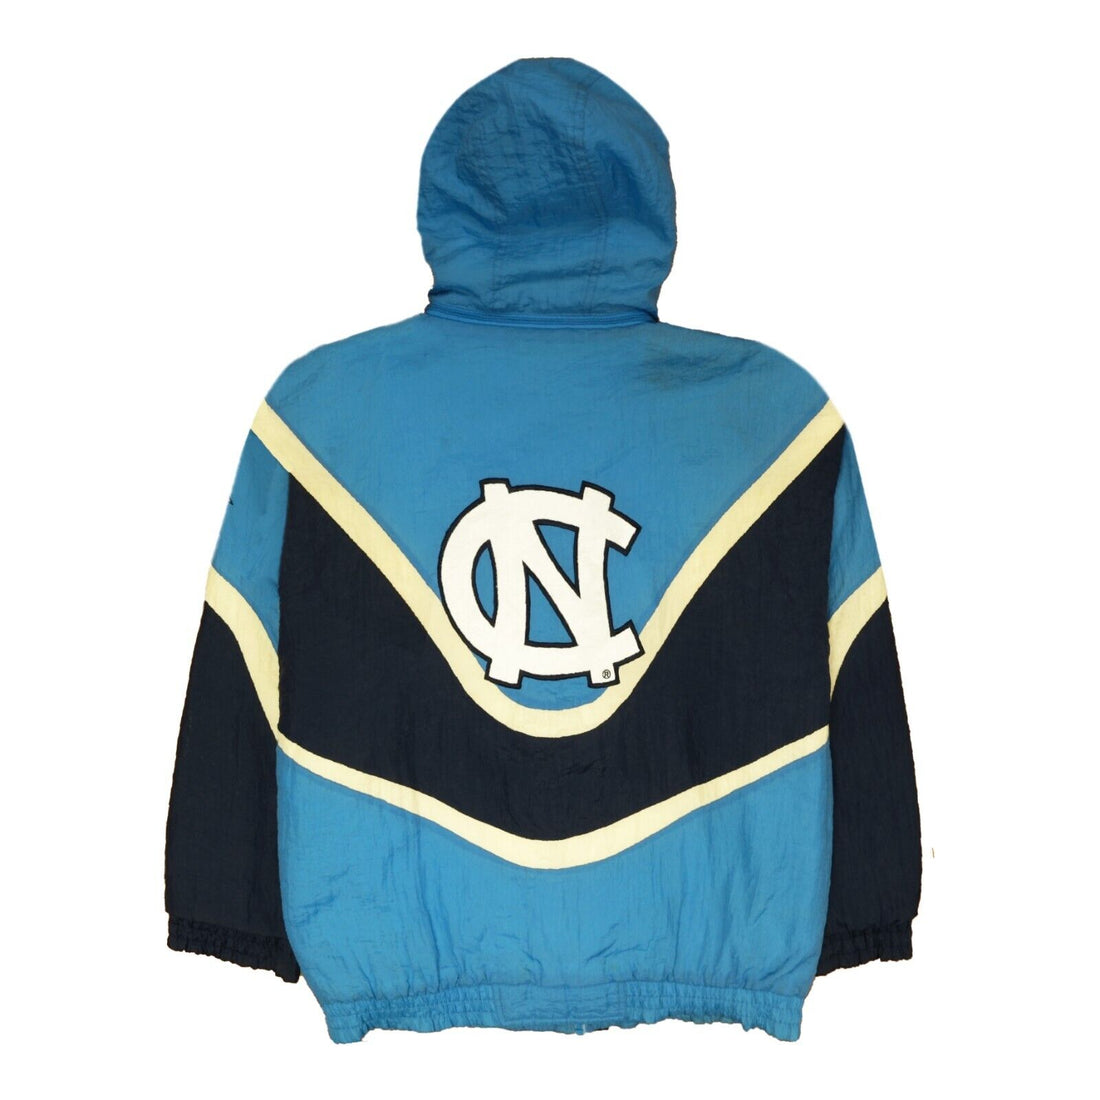 Vintage North Carolina Tar Heels Apex One Puffer Jacket Size Large Insulated 90s